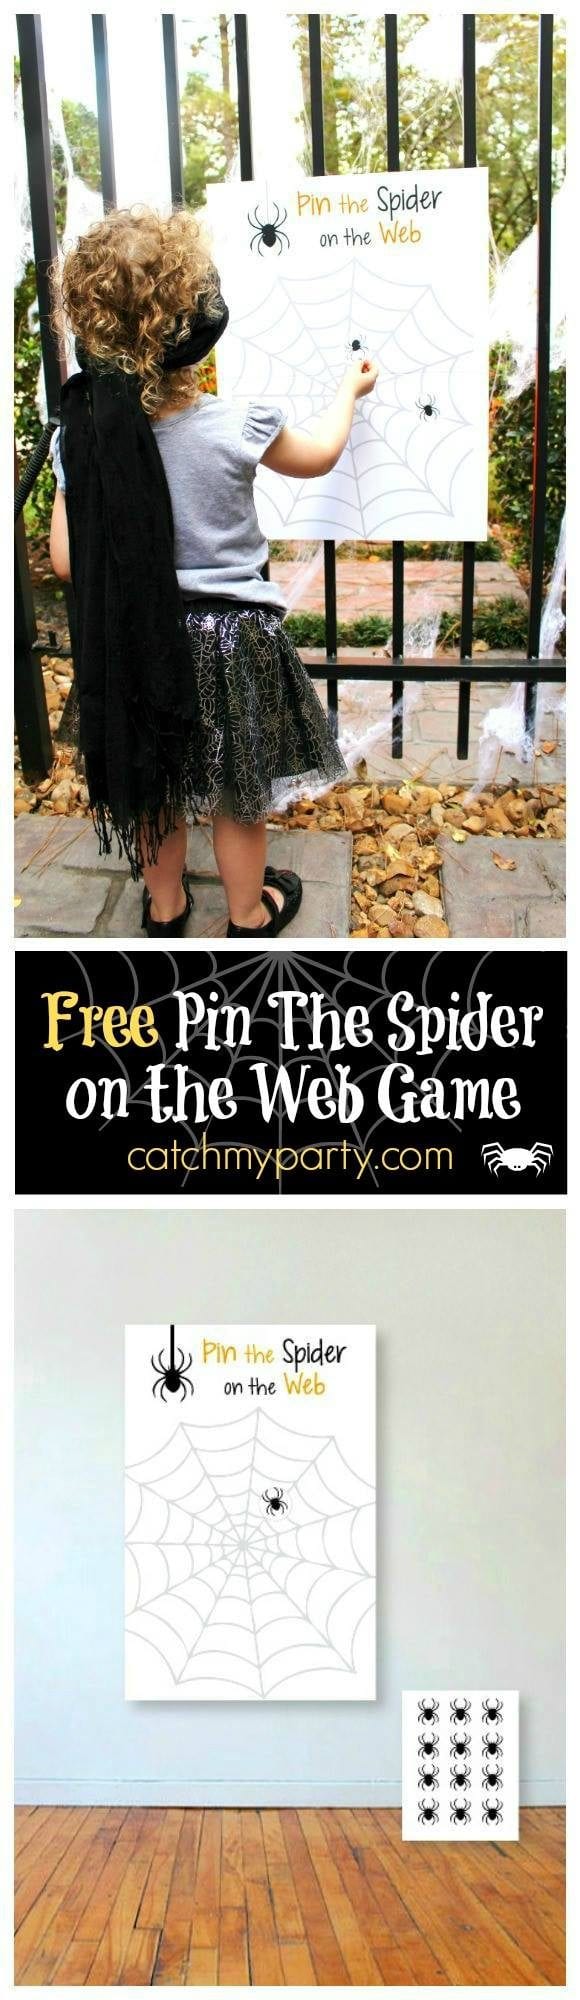 Halloween Pin the Spider on the Web Game